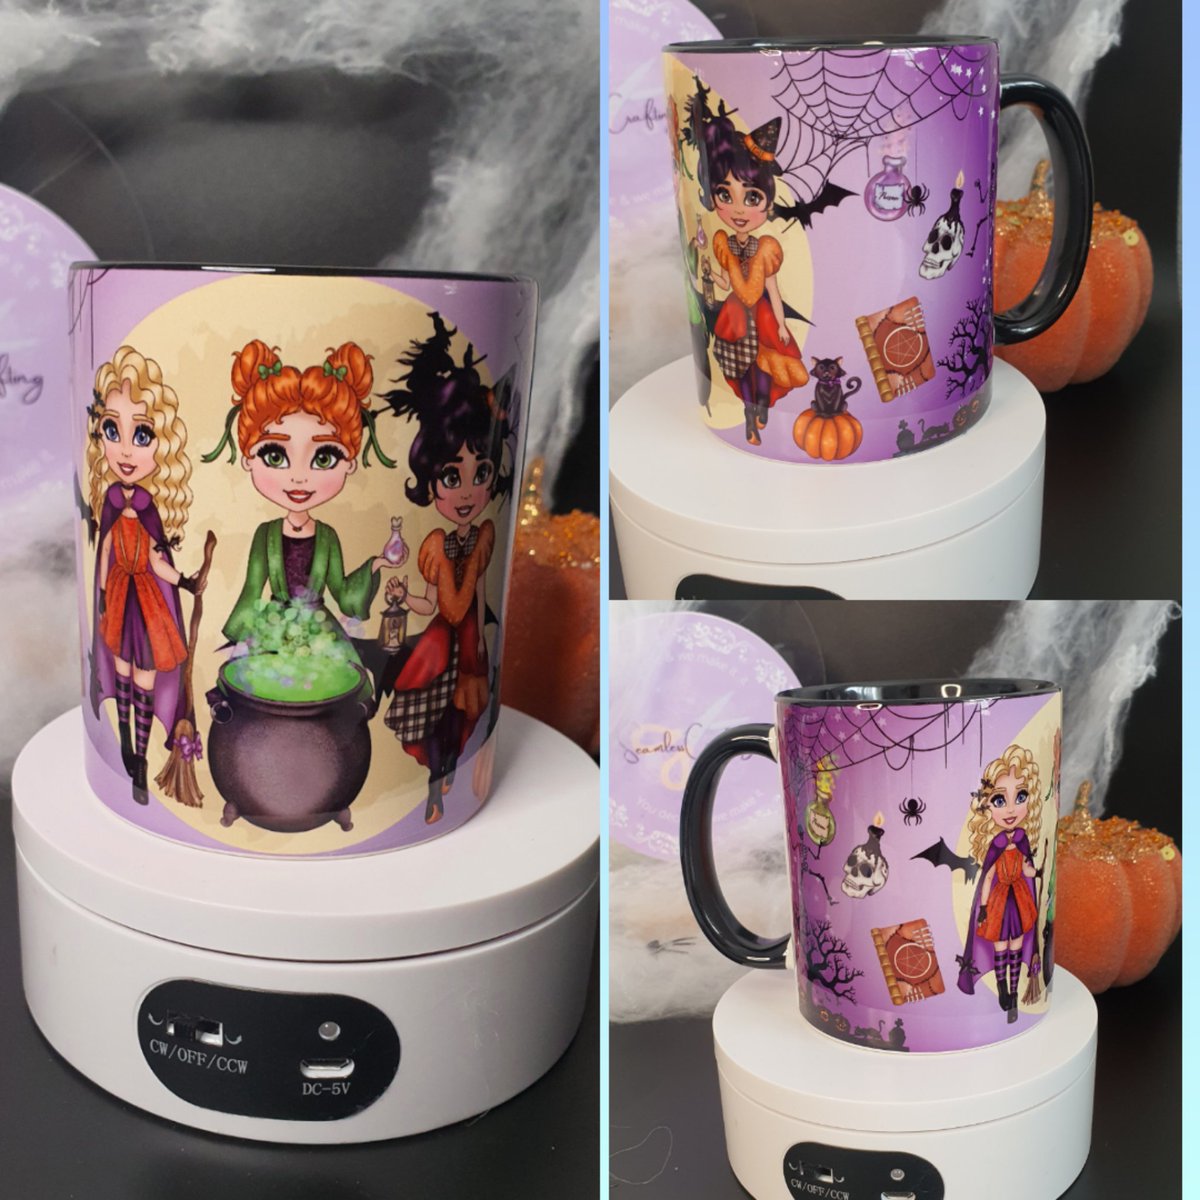 Happy Tuesday 

🎃 Get into the Halloween spirit with our personalized witch sisters design! 🧙‍♀️🧙‍♀️  

#shopindie  #htlmp #giftshop #gift  #MHHSBD #handmade #htlmp #UKMakers #craftbizparty #supportsmallbusiness #halloweengift #witchsisters #fyp #witchbrew